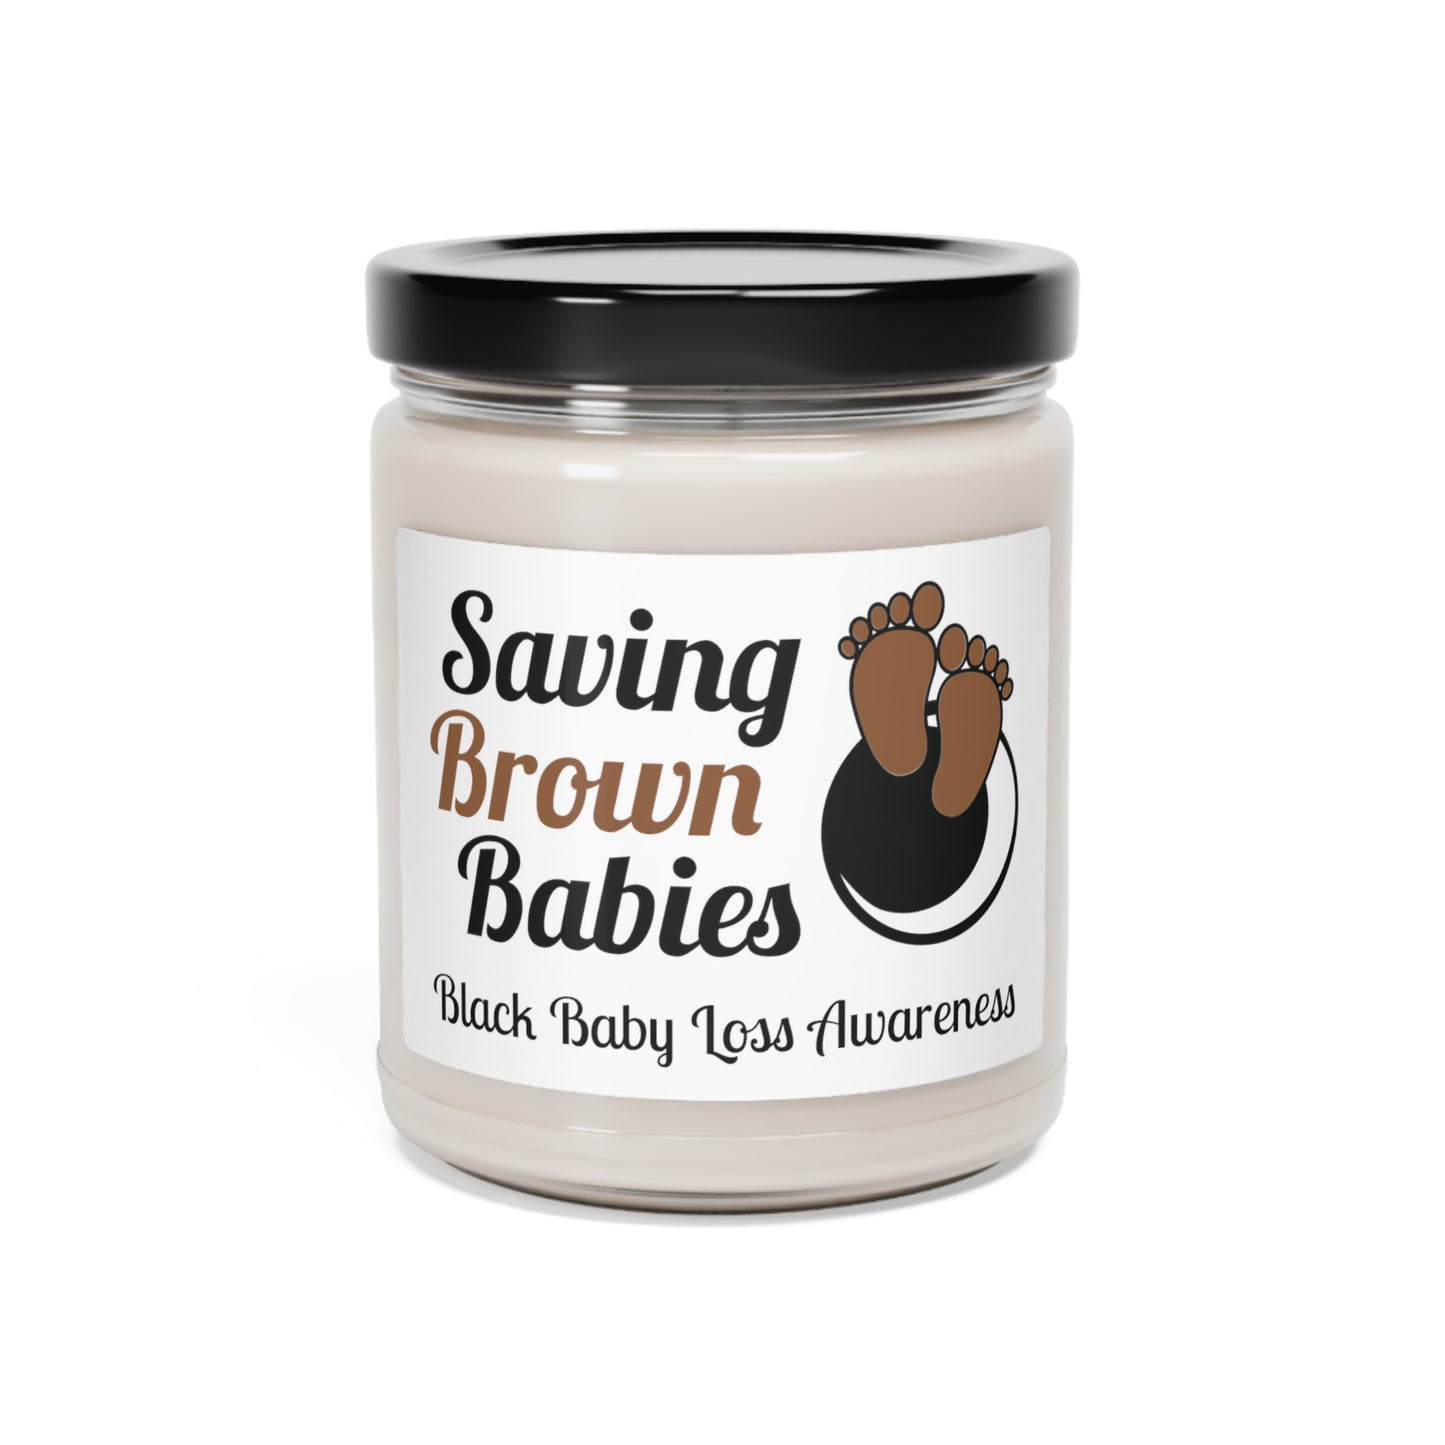 Quietly United in Loss Together and Saving Brown Babies 9oz Soy Candle to Support Pregnancy & Infant Loss Awareness